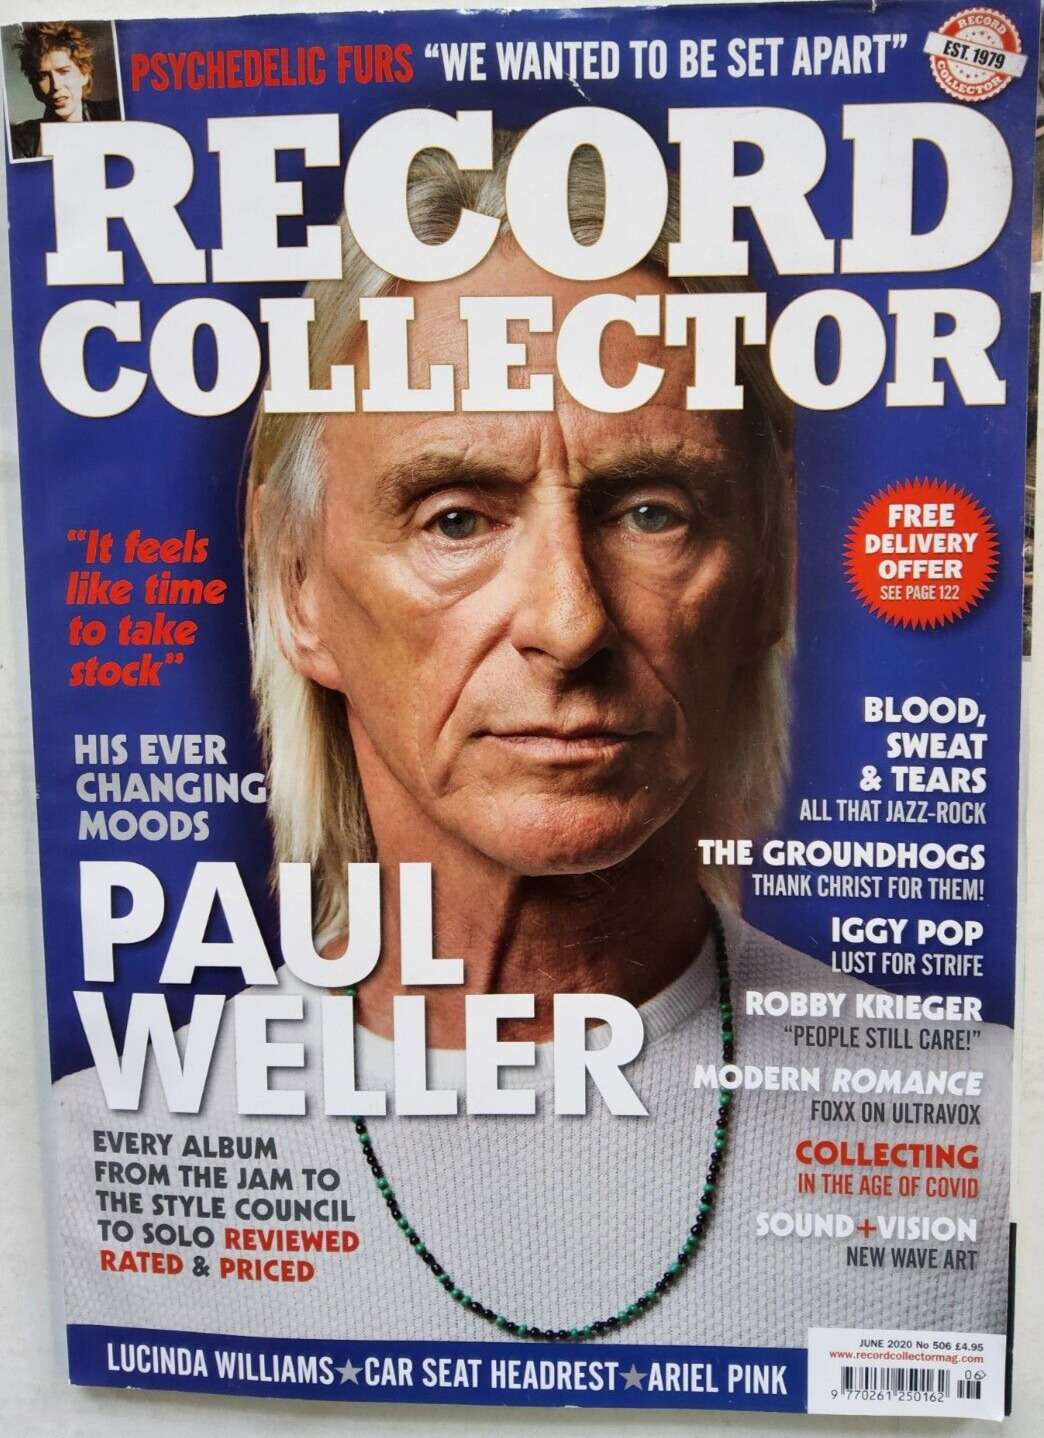 Record Collector Magazine June 2020 monthly issue number 506 Paul Weller